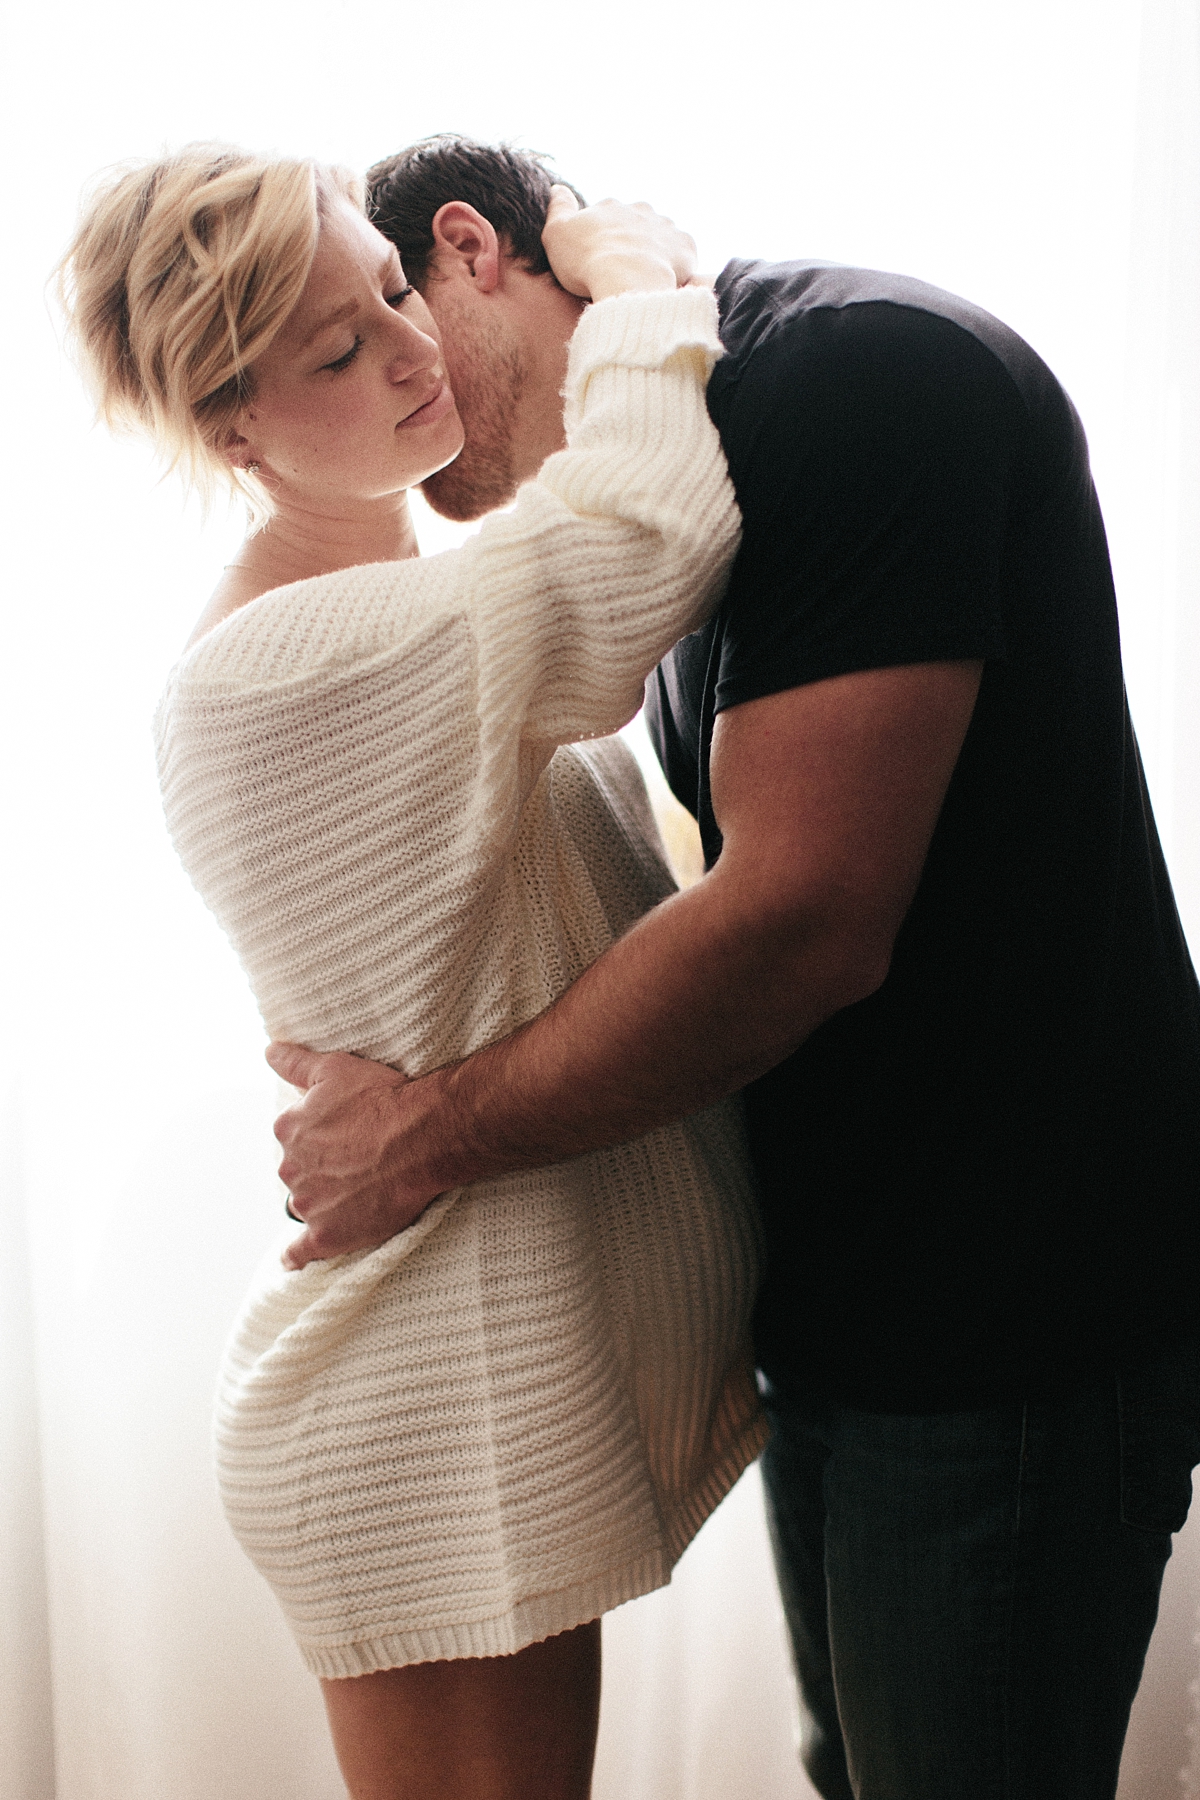 home maternity session by golden veil photography midwest north dakota photographer